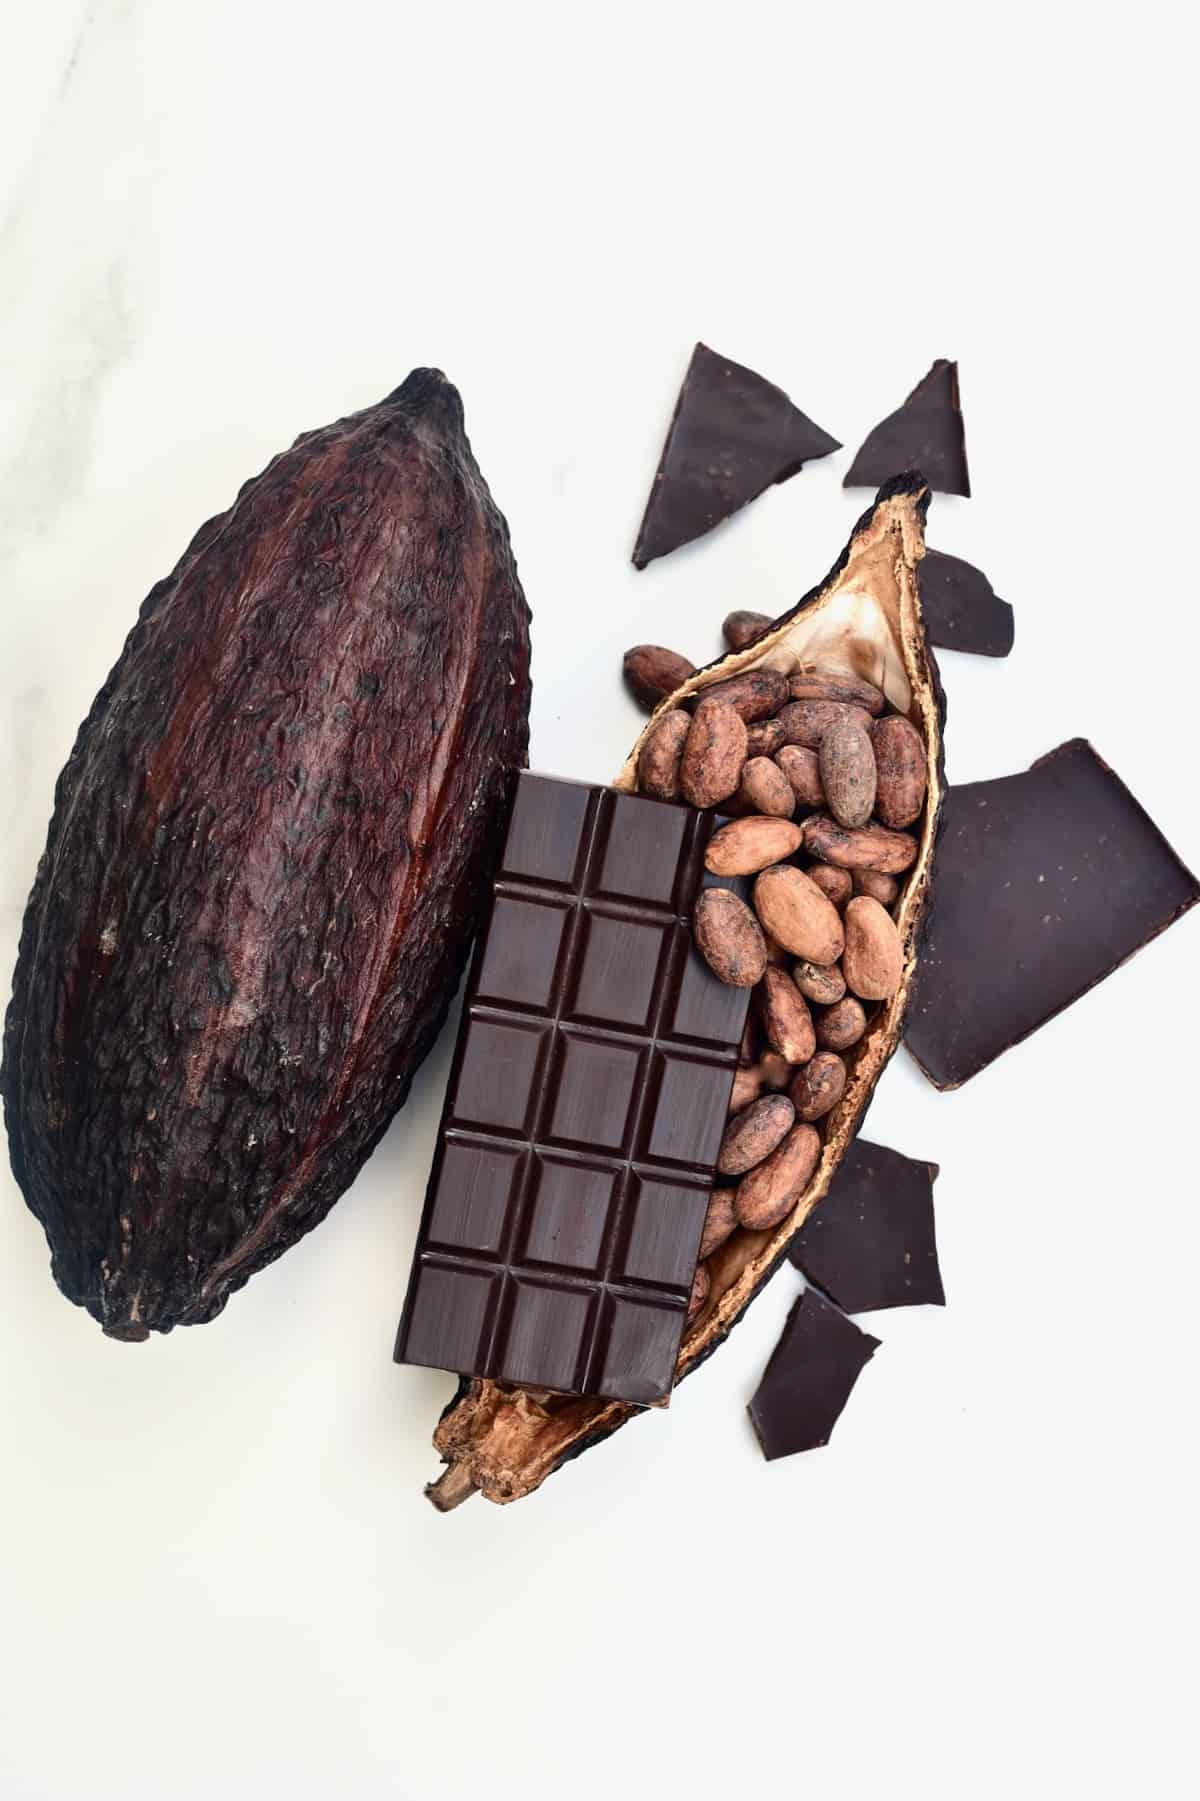 How To Make Chocolate From Cocoa Beans (Bean to Bar Chocolate)